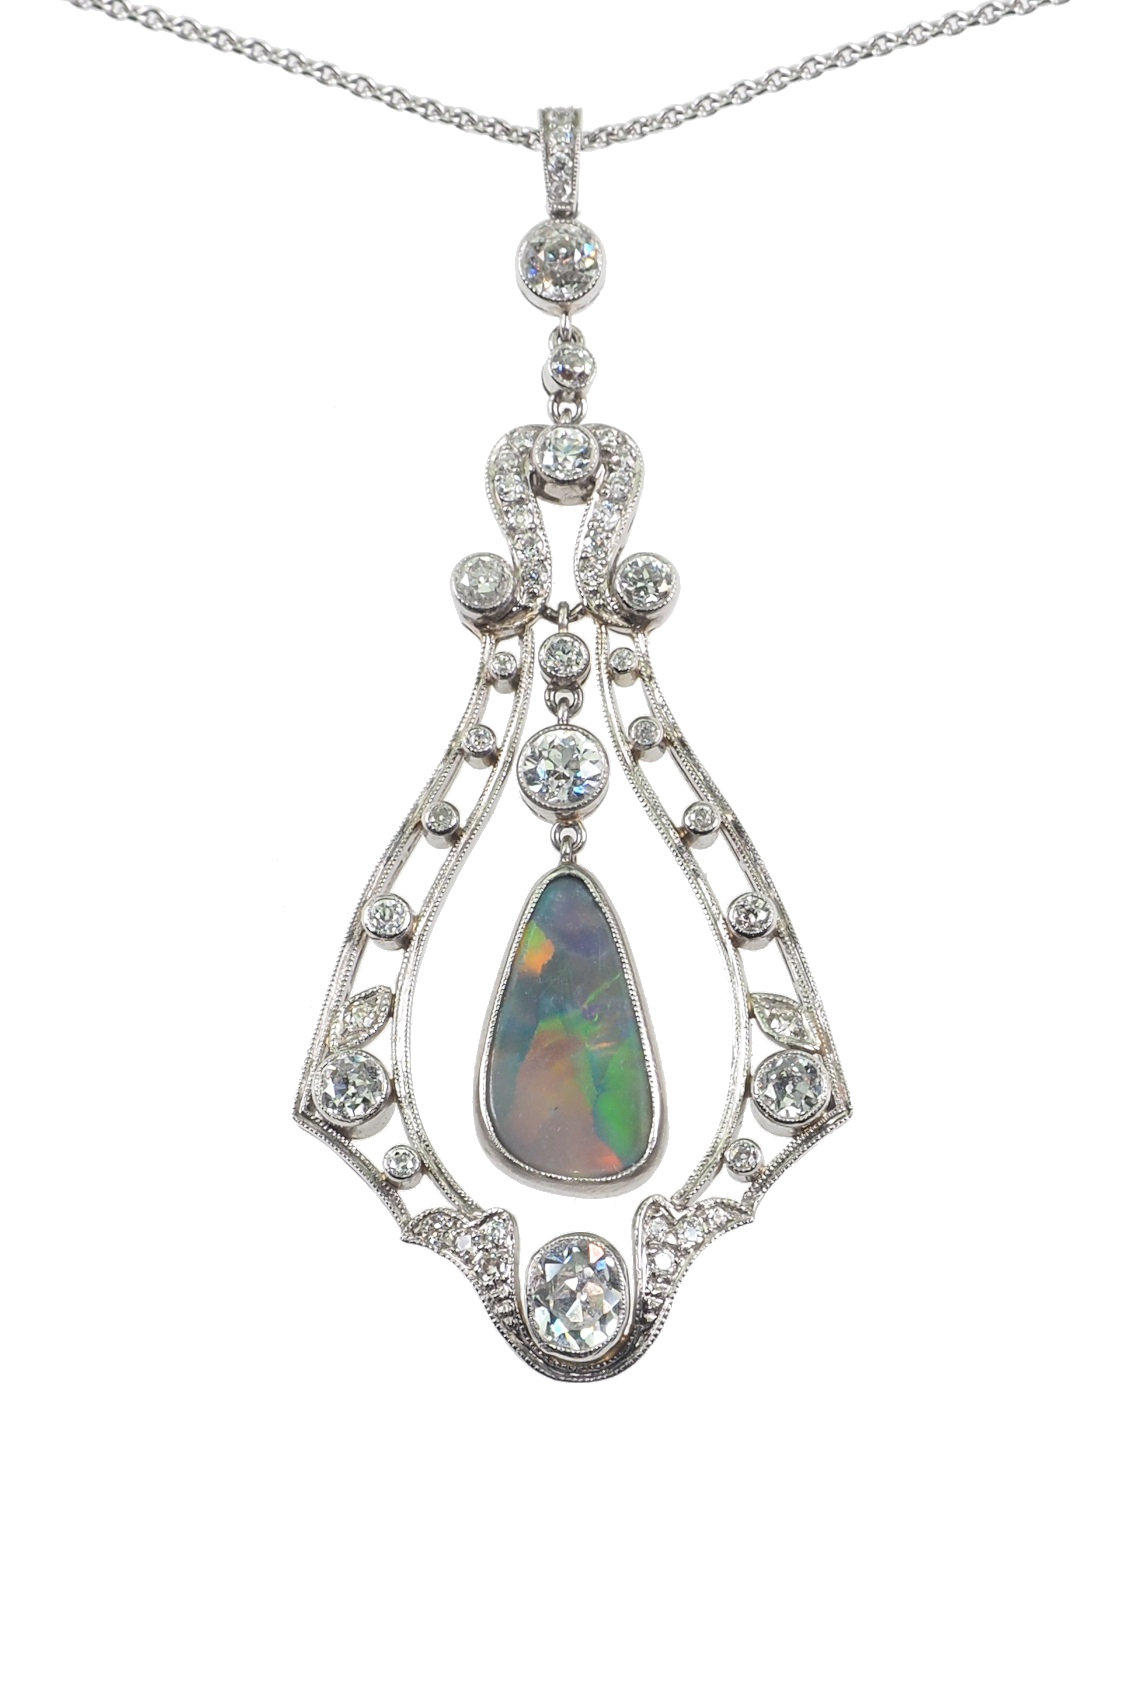 luxurious-antique-jewellery-2827a